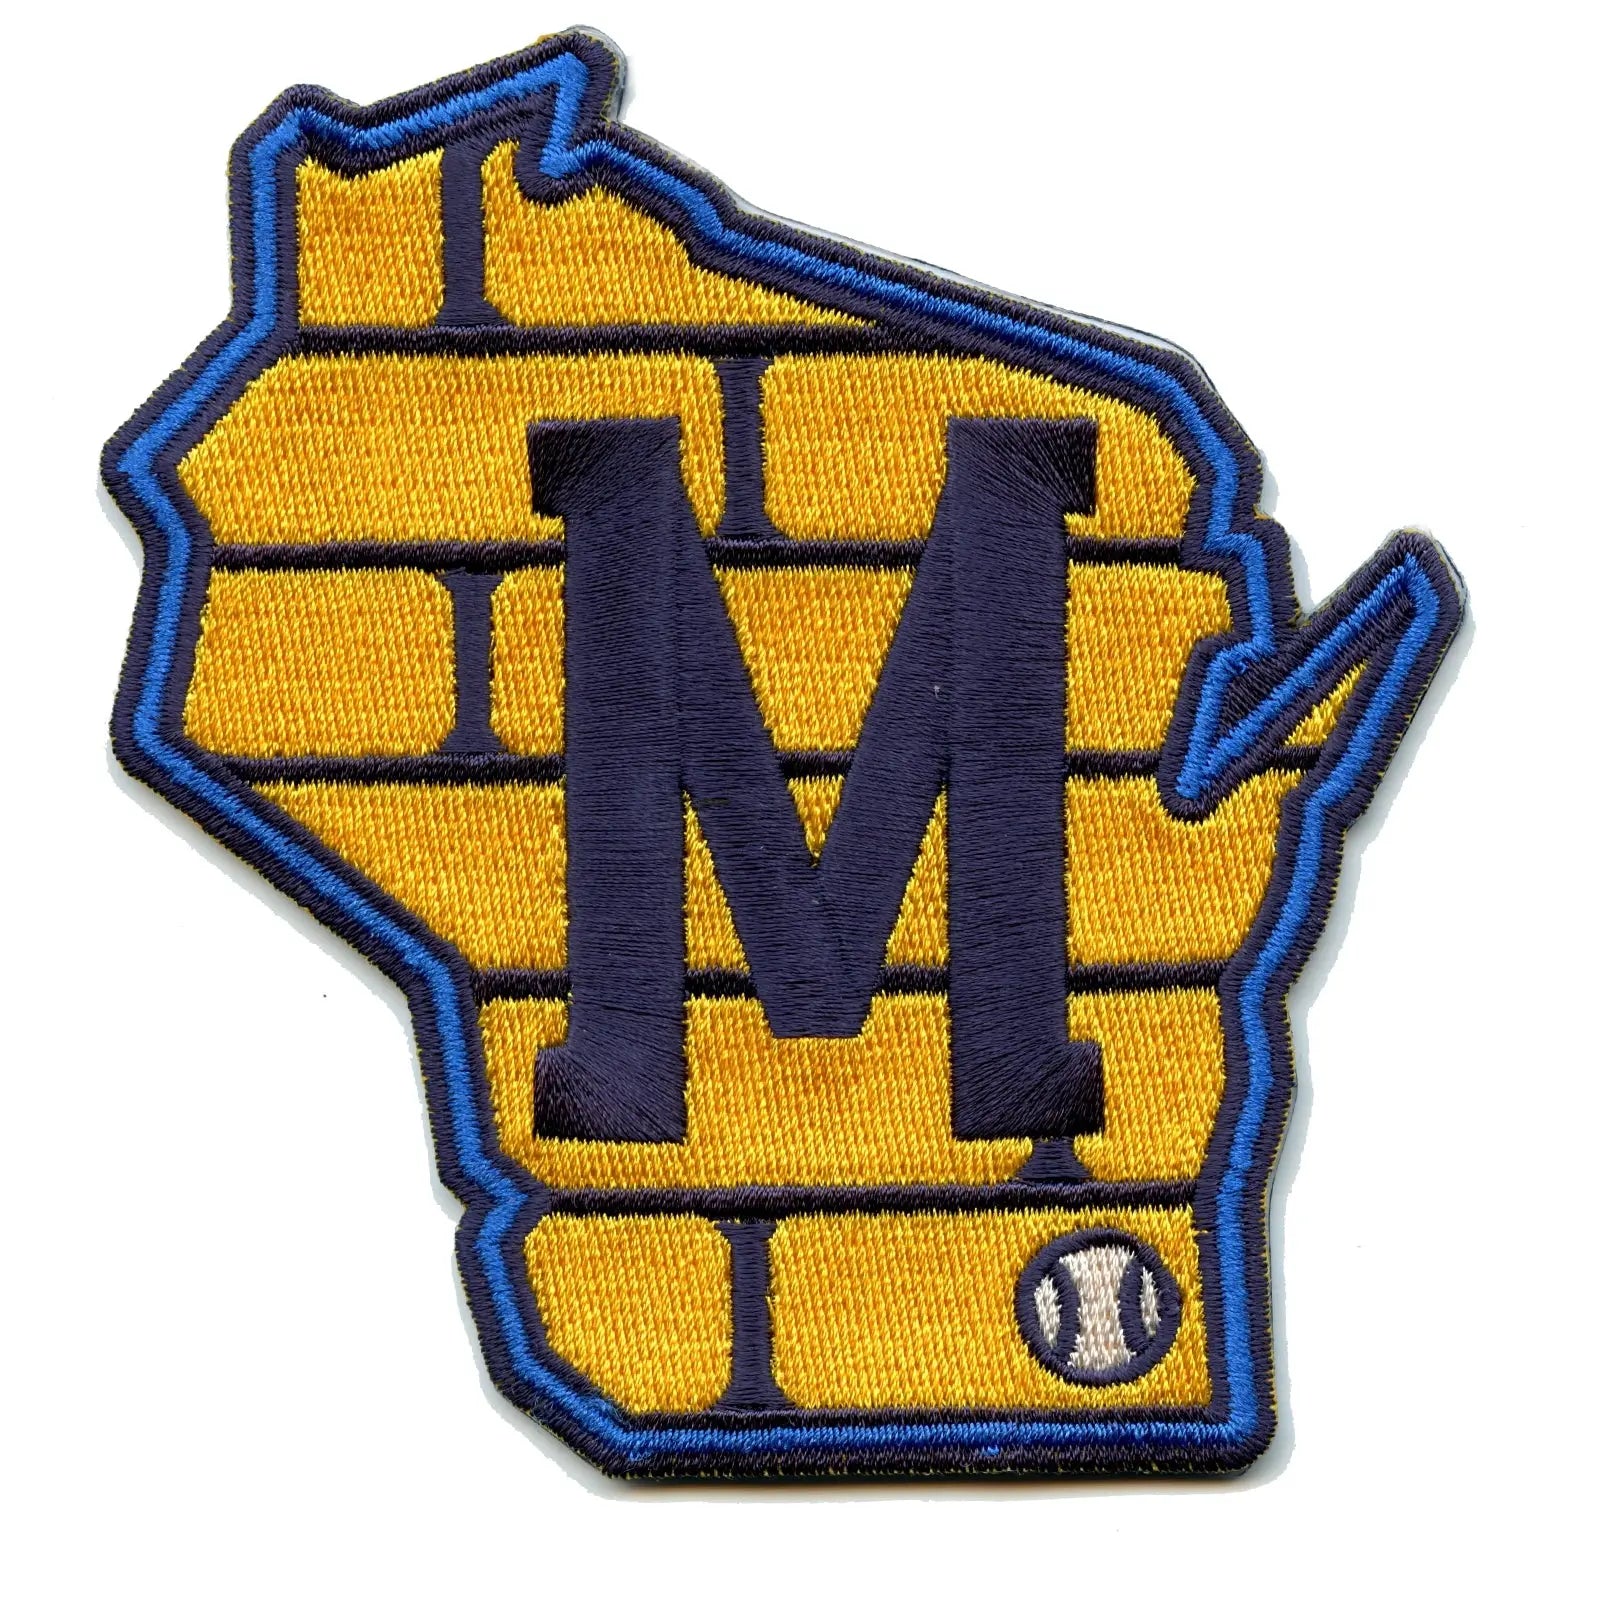 2020 Milwaukee Brewers Road Sleeve Patch by Patch Collection